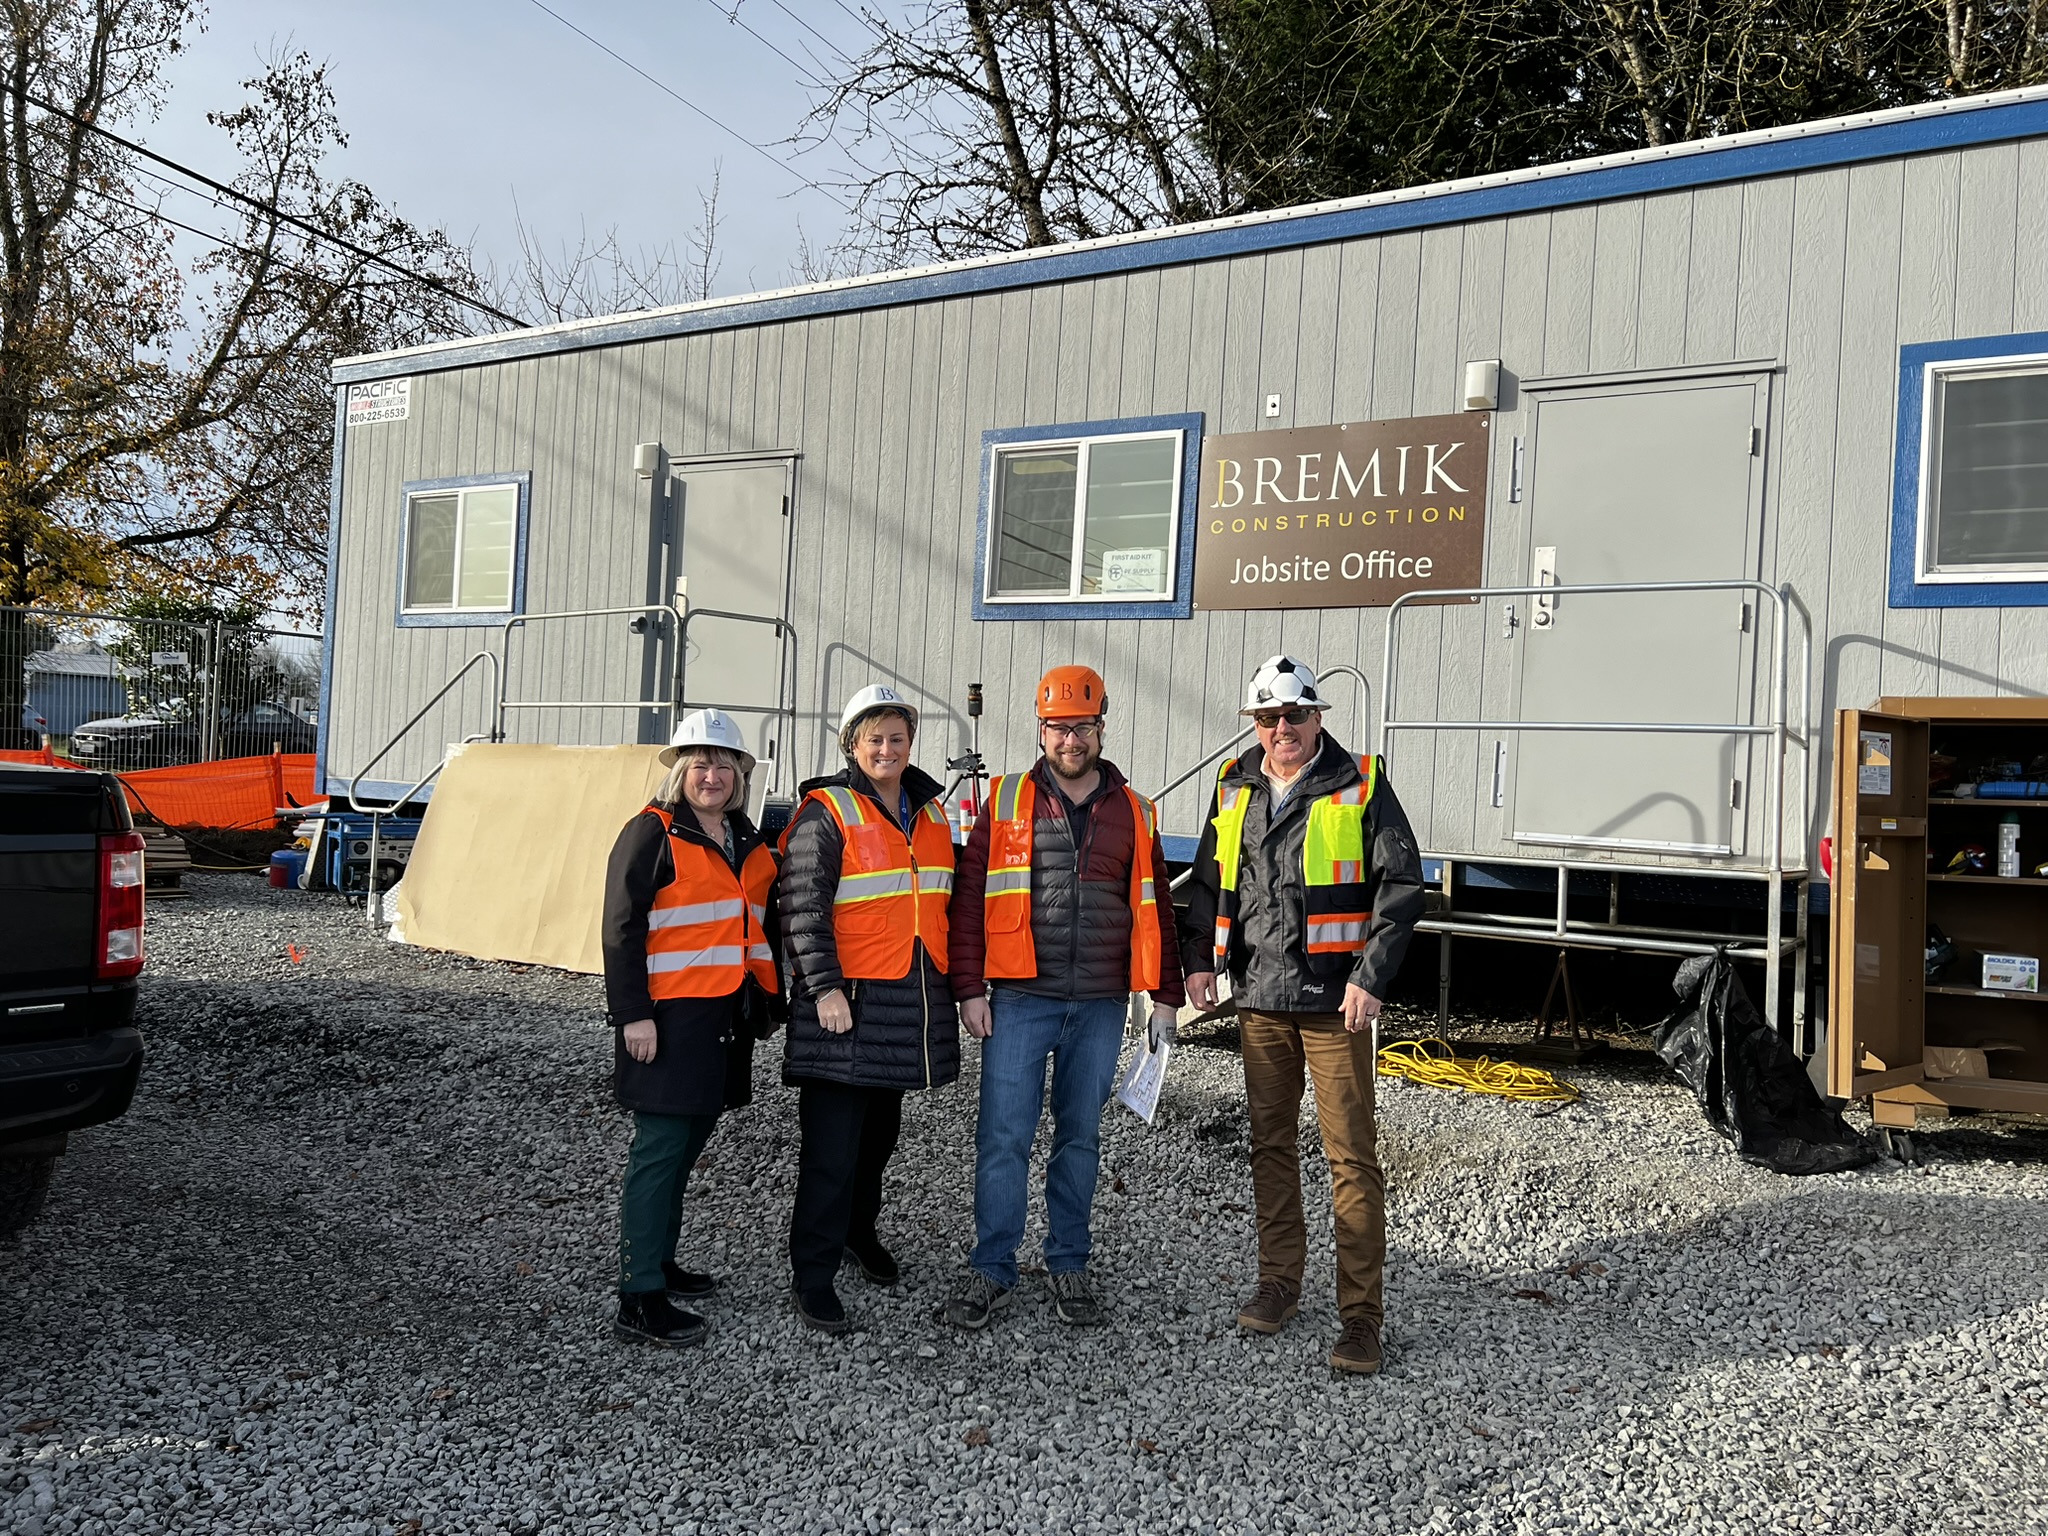 Executive Director Jennifer Giltrop and Woodland Community Library Branch Manager Jennifer Hauan stand with workers in front of the Bremik Construction jobsite office 